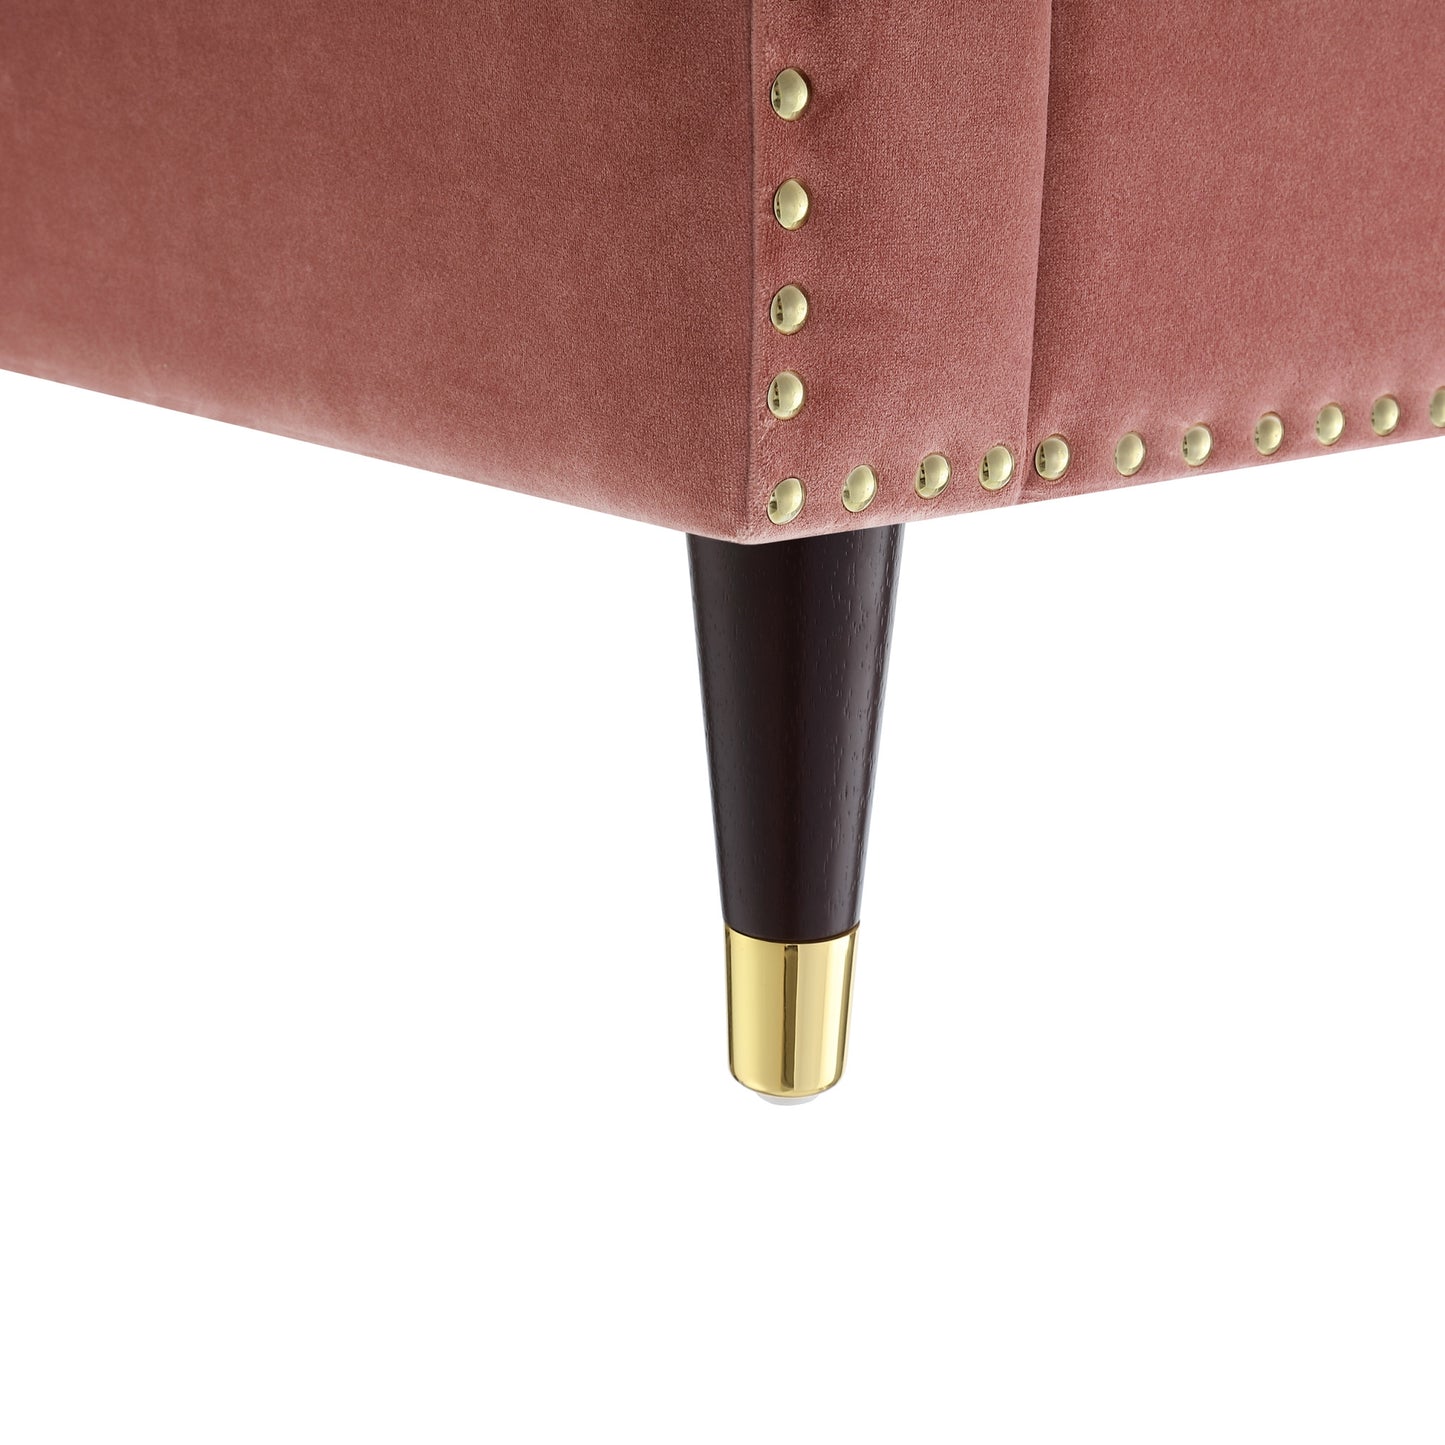 34" Blush And Gold Velvet Tufted Club Chair